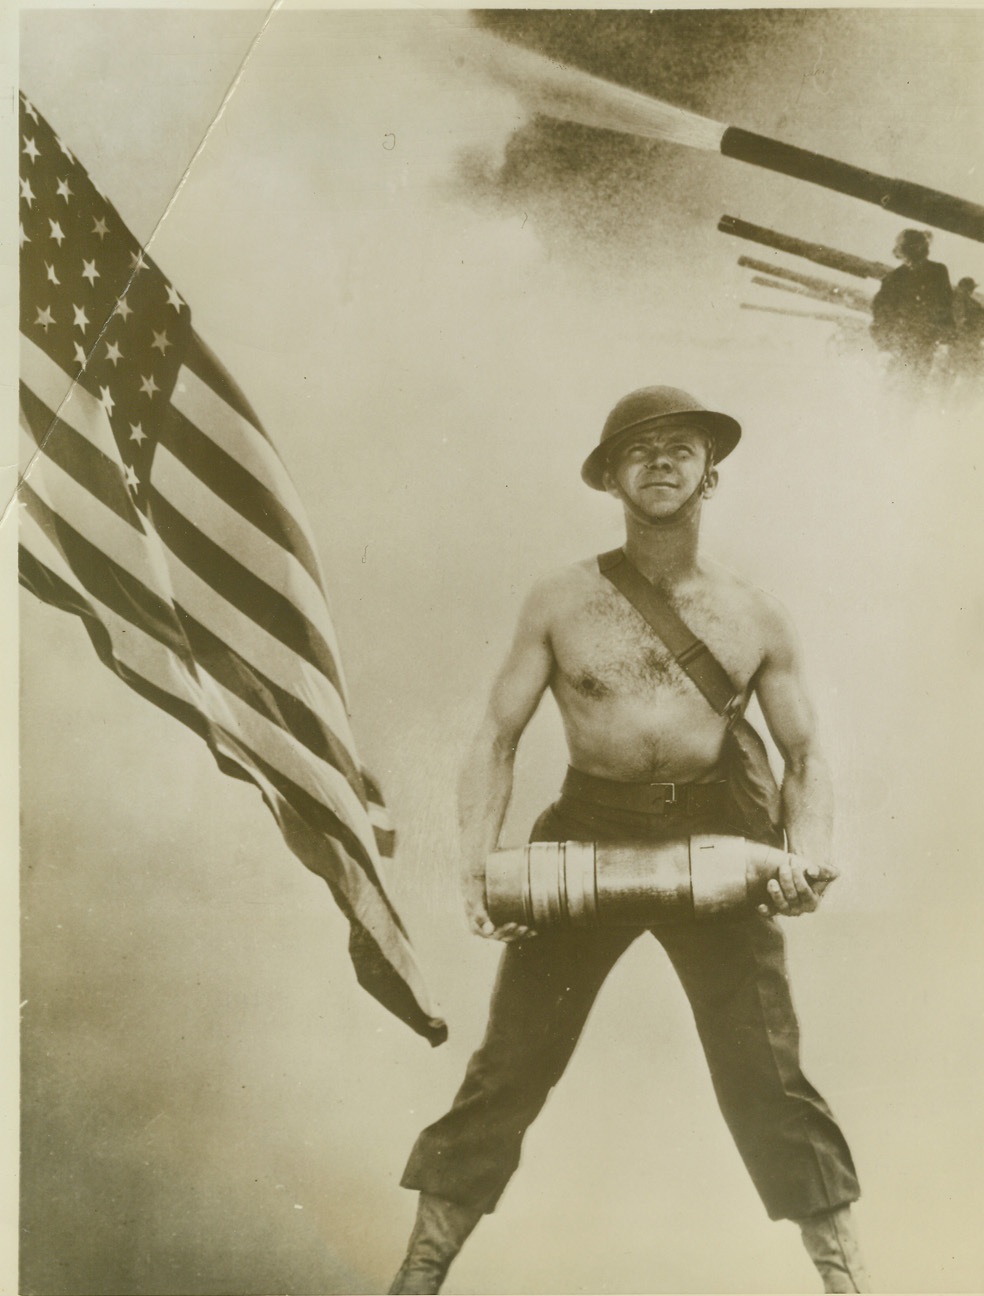 “And We’ll all be Free”, 11/6/1942. Camp Callan, Calif – A fighting Marine beside the Stars and Stripes and ready to “pass the ammunition” symbolizes observance of United States first wartime Armistice Day, next week. Sun-browned and tough-muscled, the Camp Callan soldier is joined by thousands of other fighting leathernecks battling for all the first Armistice results’ failed to accomplish. Credit: (ACME U.S. Army Photo);